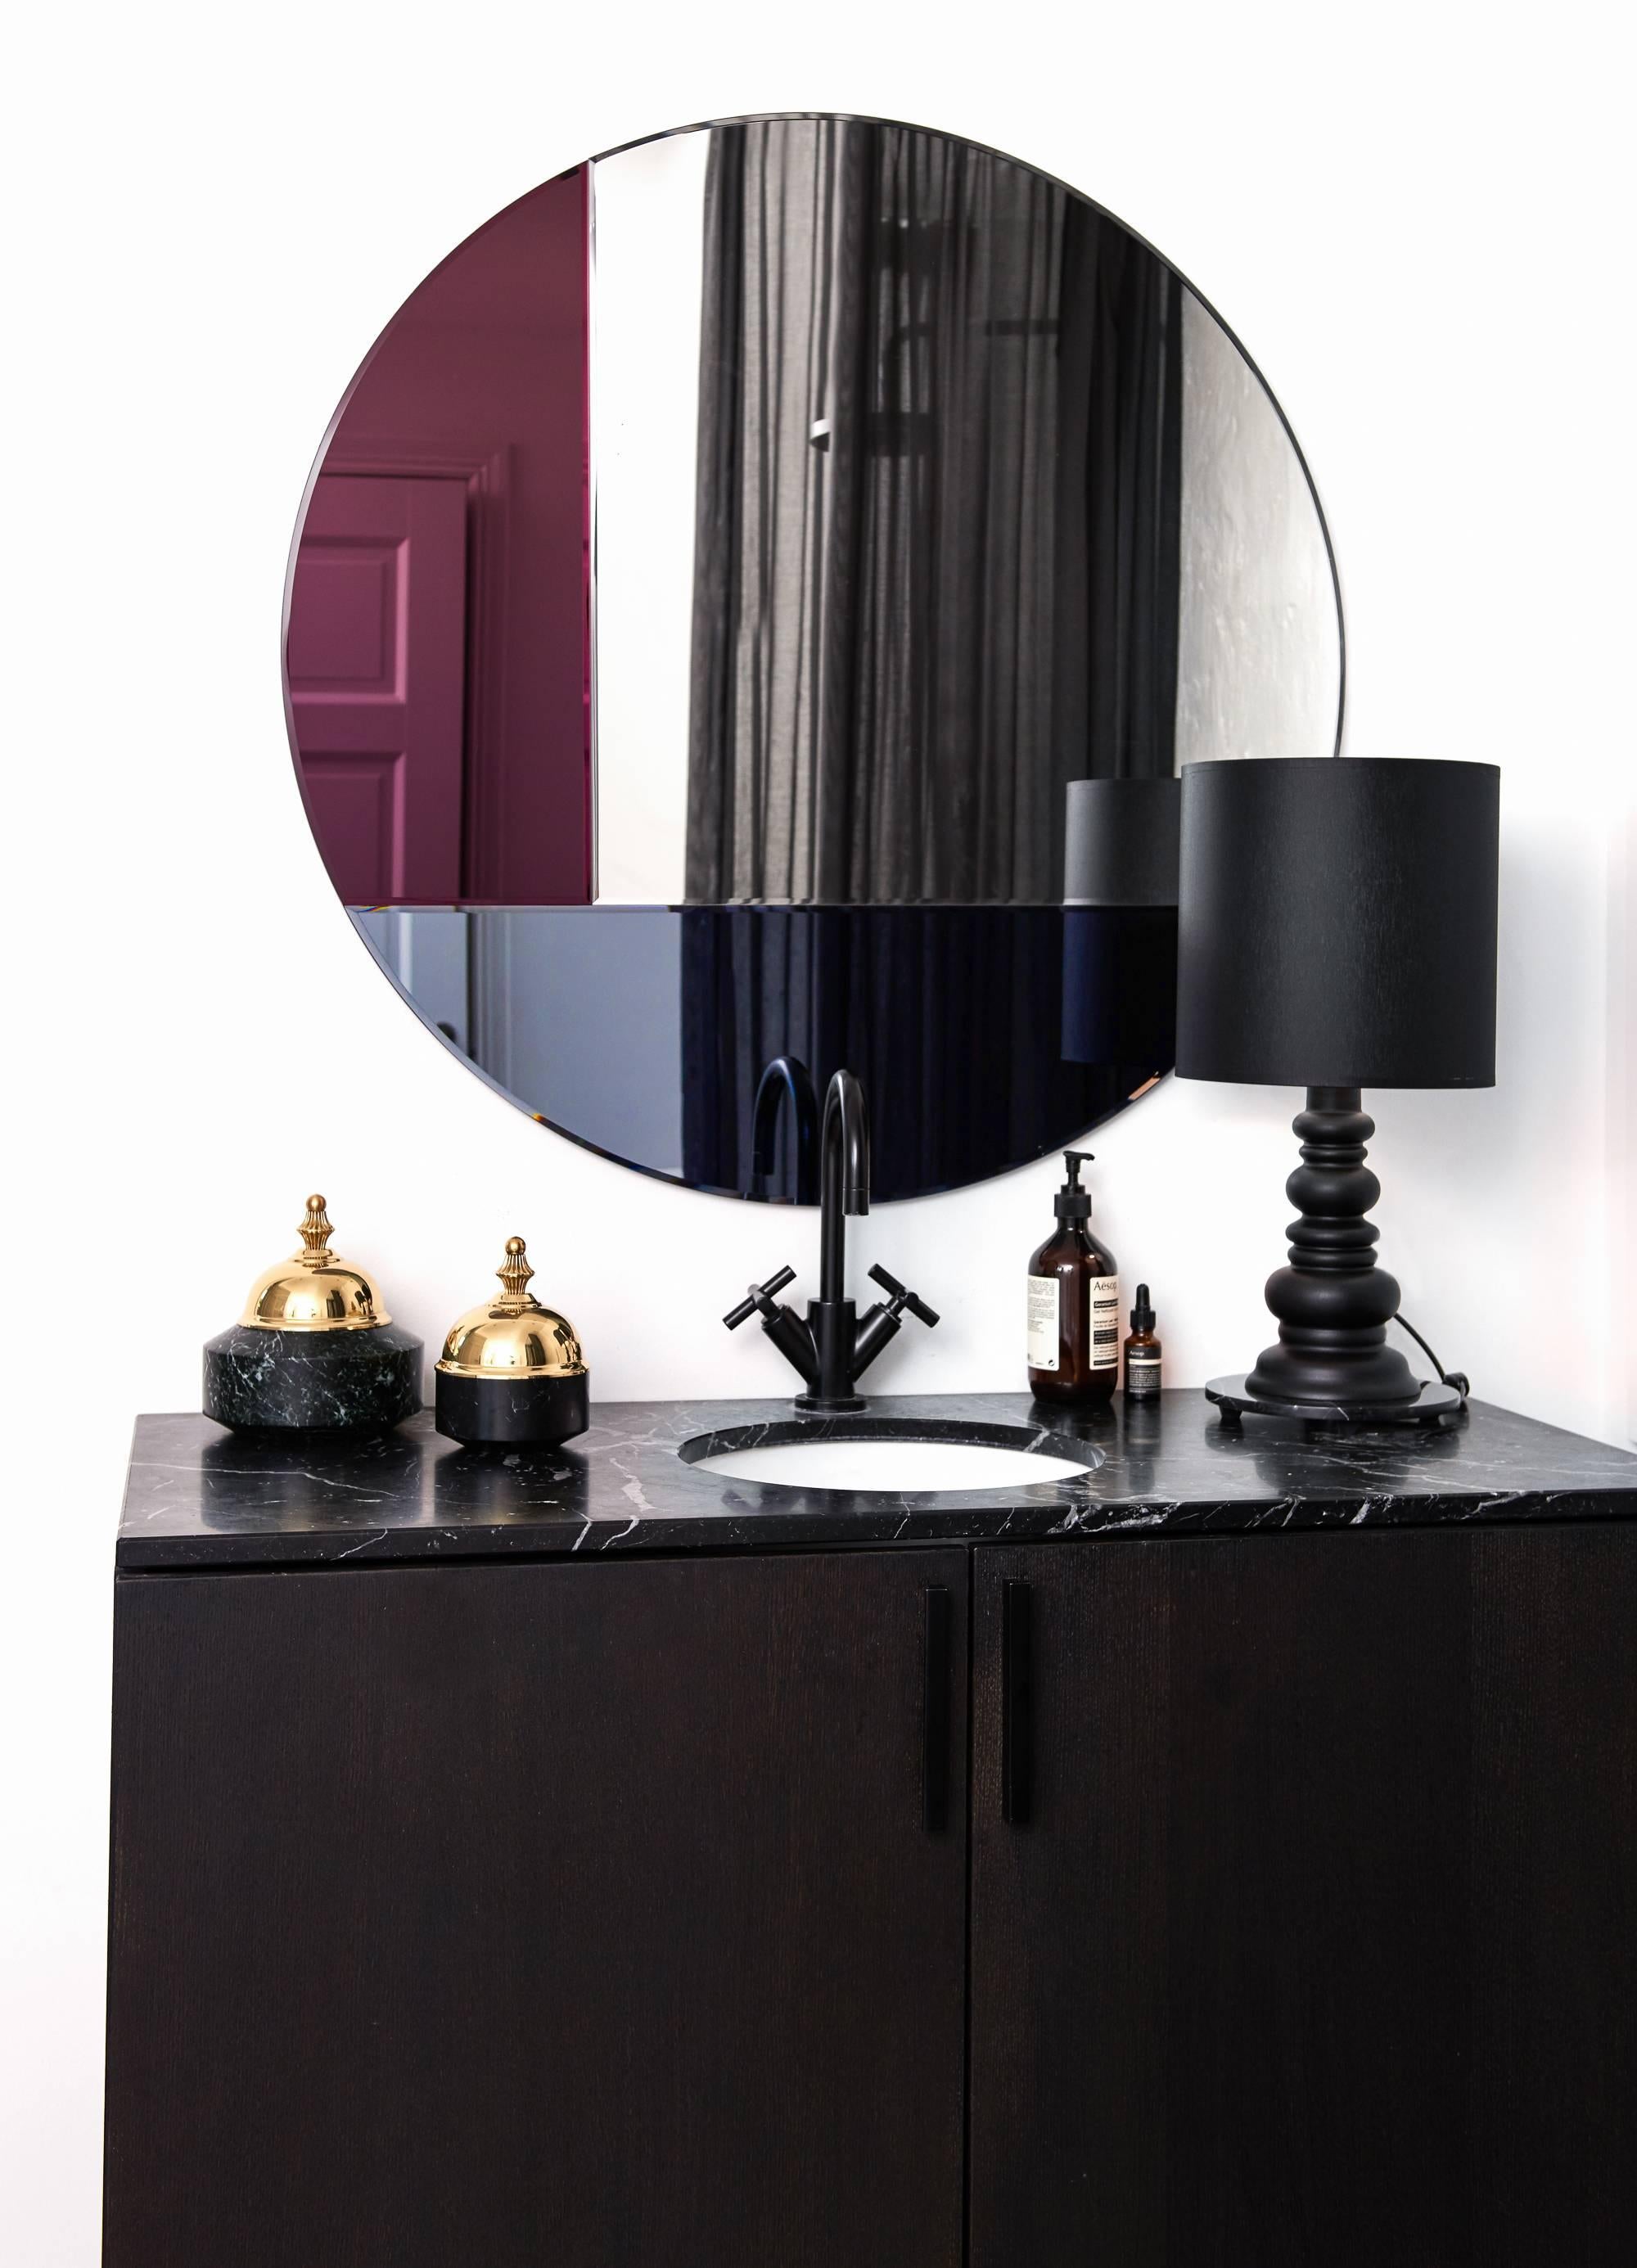 Nouveau Design Colorful mirror, NOUVEAU 90
Mirror
4mm faceted mirror on black painted mdf
Diameter: 90 cm

NOUVEAU 90
The Nouveau 70/80/90 round mirror serie unites elegance with simplicity and is characterised by its geometric color